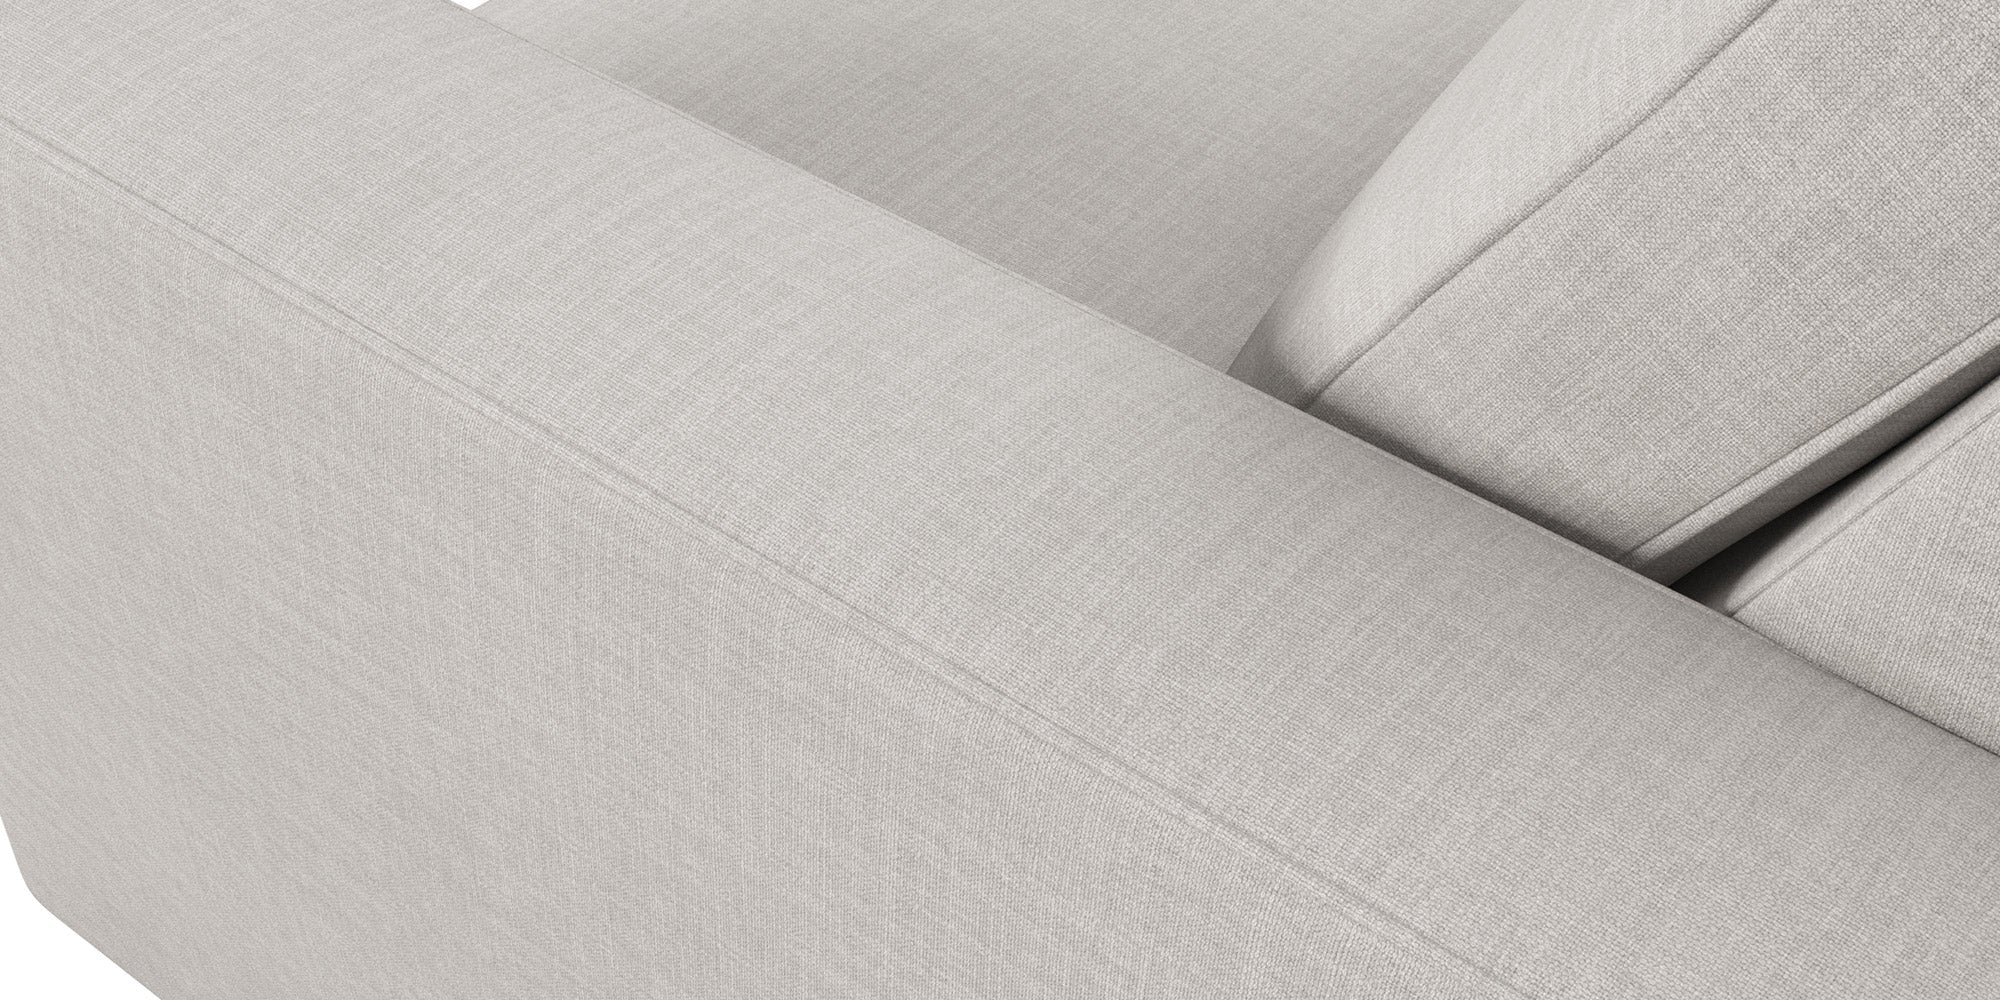 G: Rio Sofa Bed, shown here in Texture Haze fabric and Dave Cafe legs.